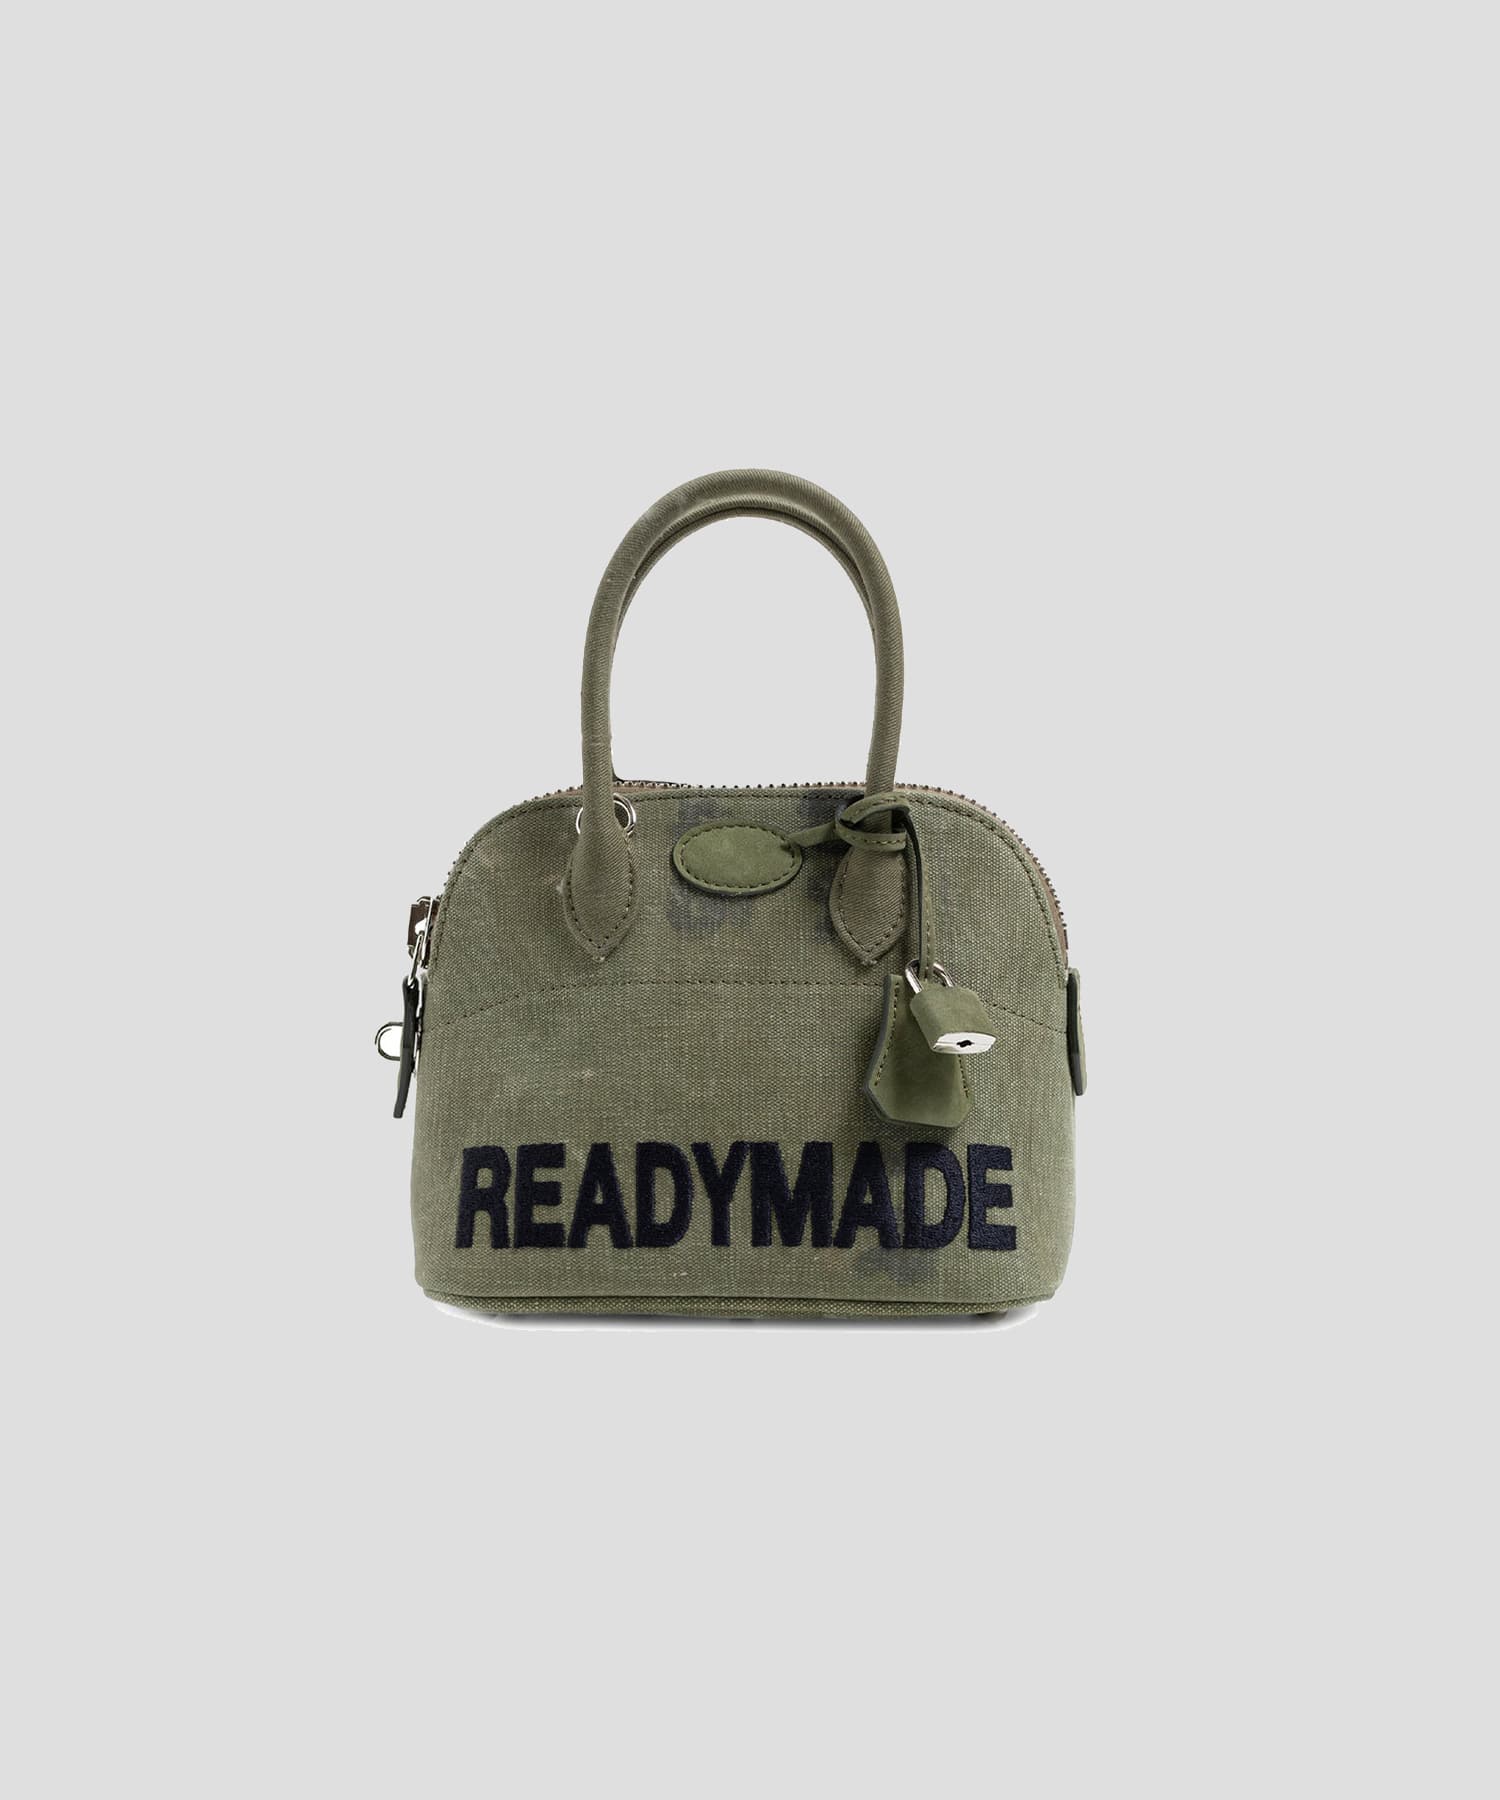 【READY MADE】RE-CO-KH-00-00-64/DAILY BAGdenimtears